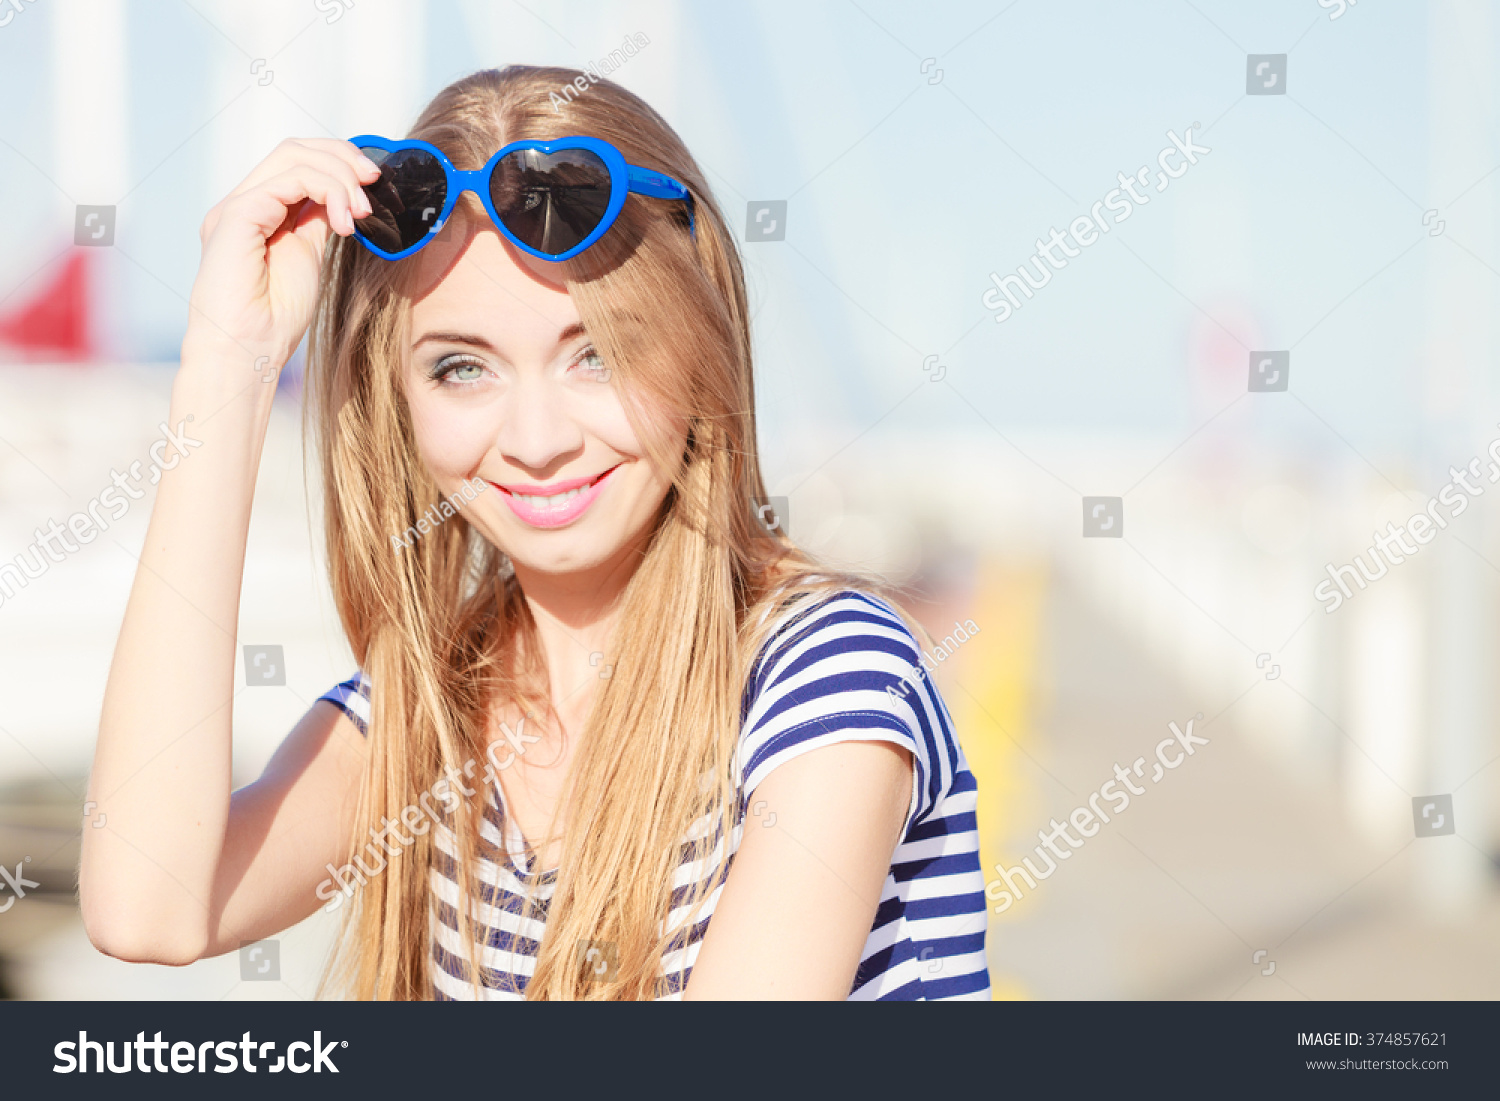 Travel tourism and people concept. Fashion blonde girl with blue heart shaped sunglasses in marina against yachts in port #374857621